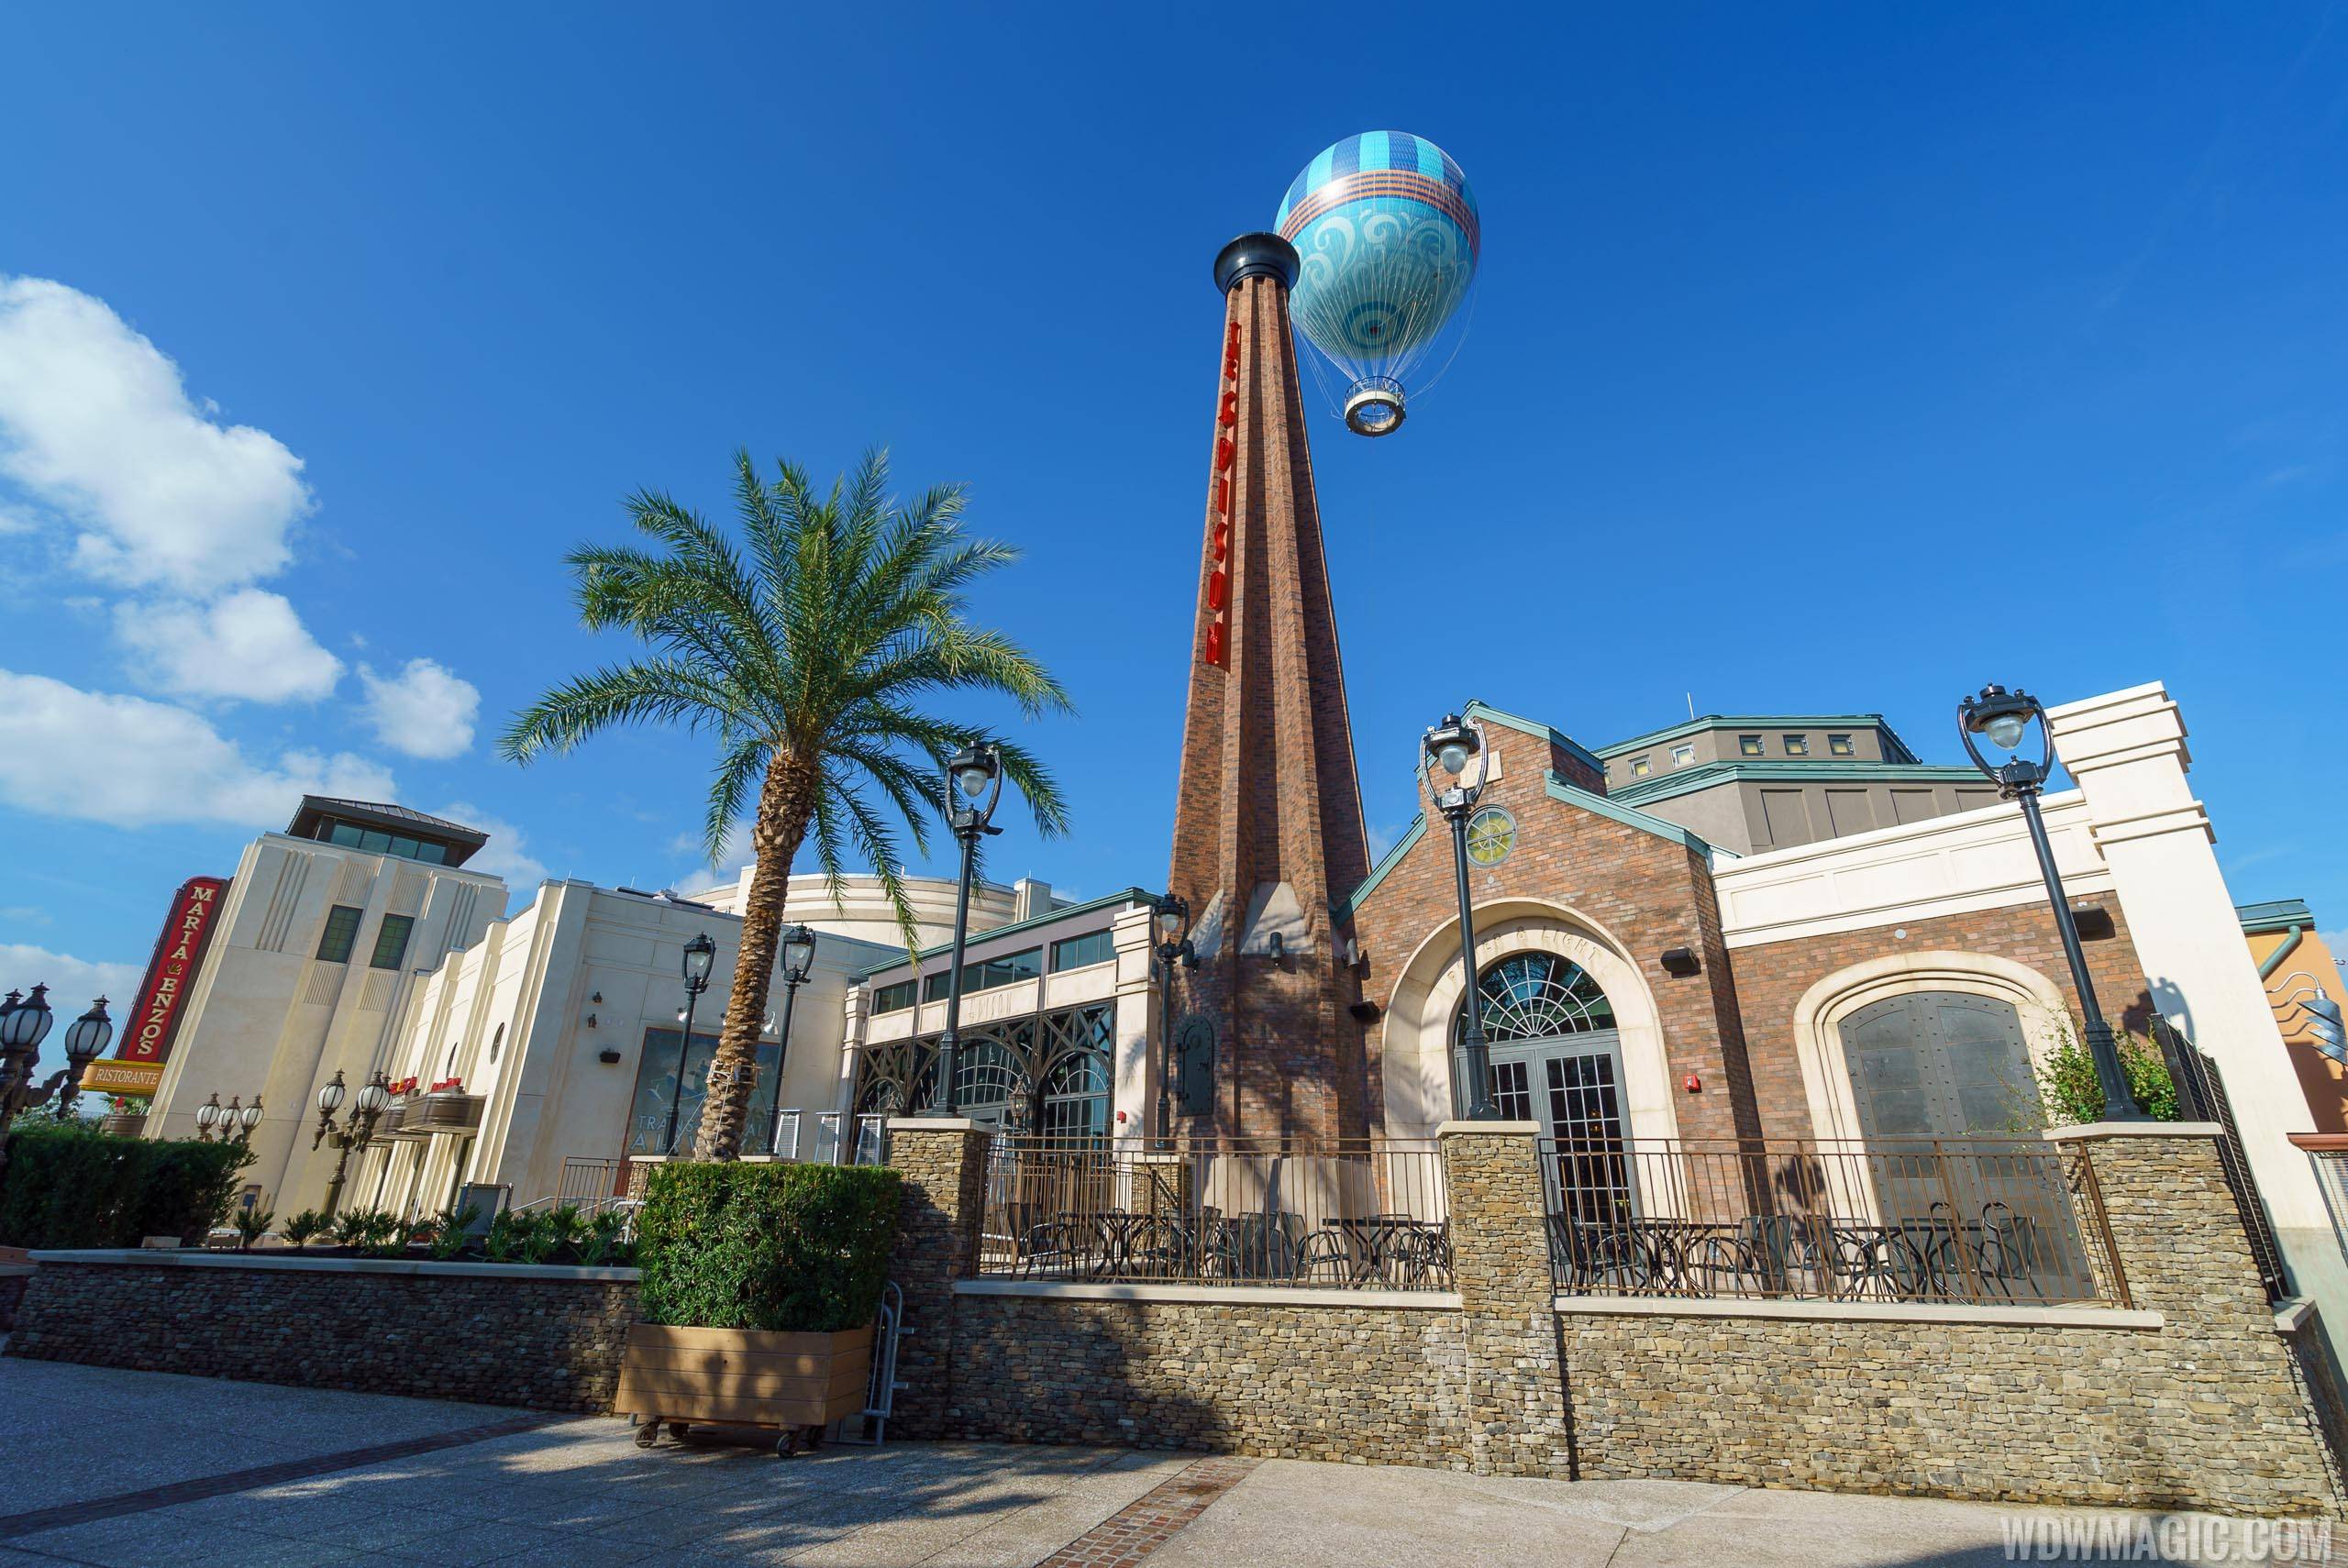 The Edison opens soon at Disney Springs